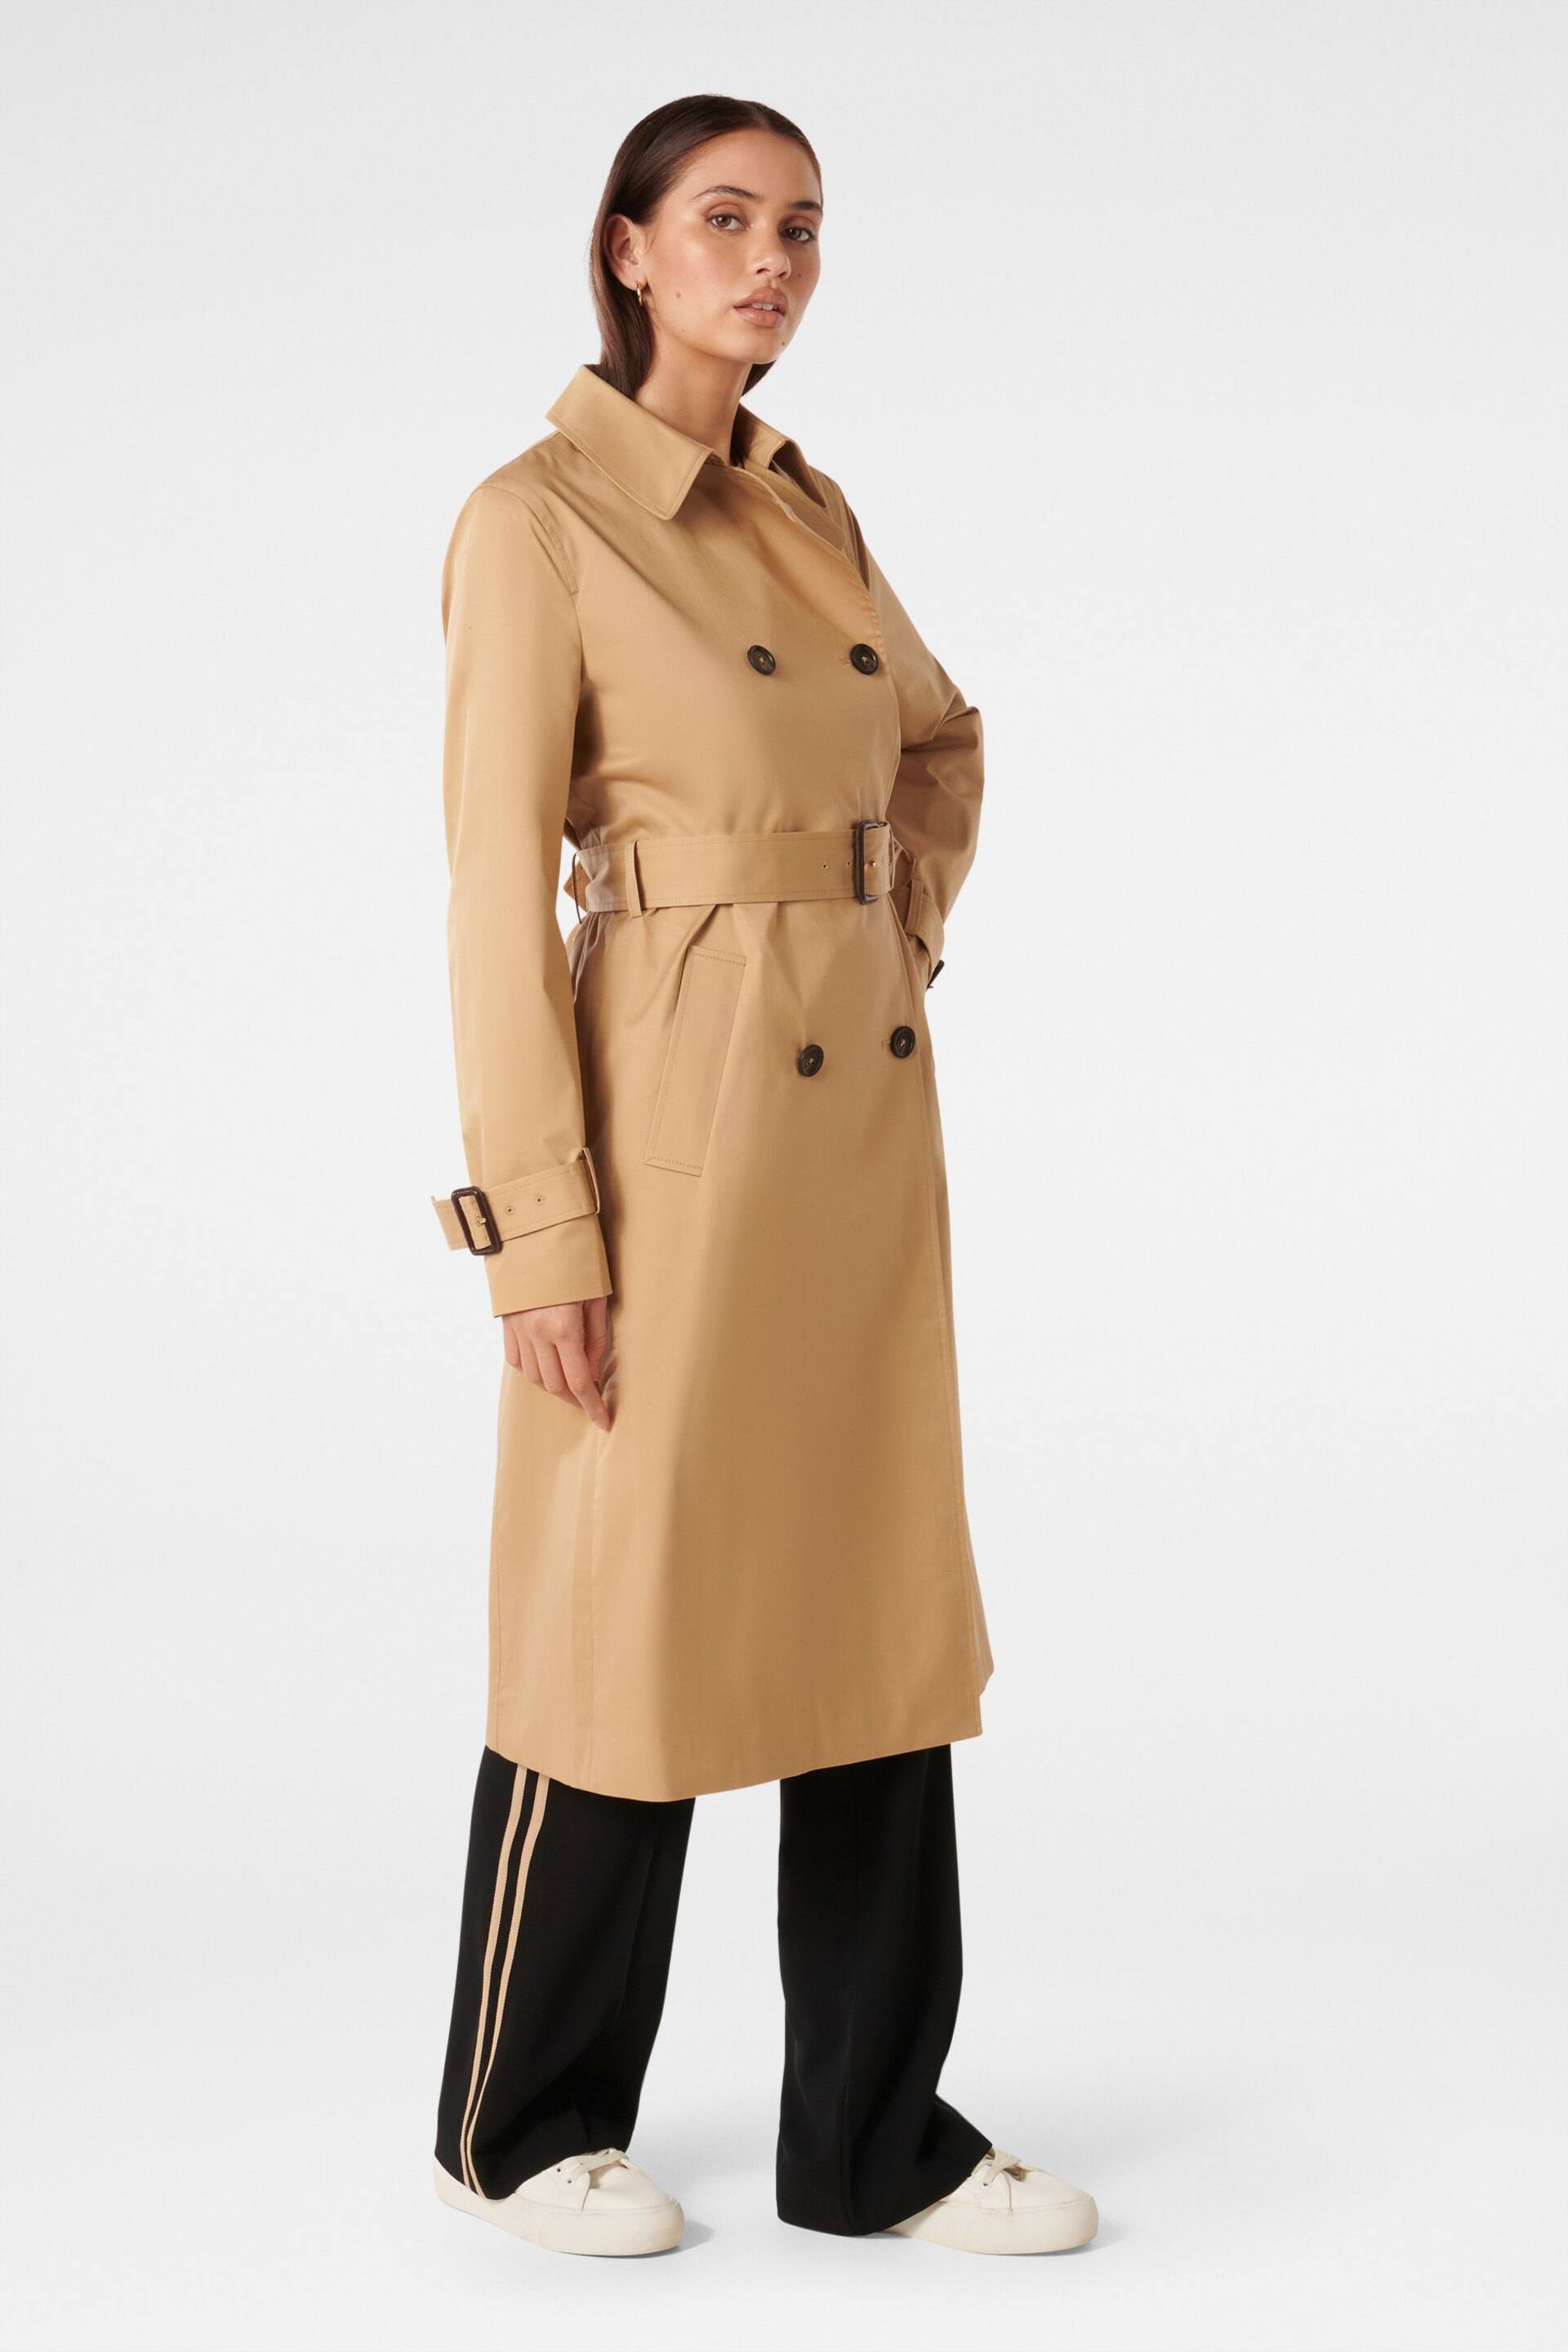 Forever New Animal Jacinta Classic Trench Coat - Image 3 of 4